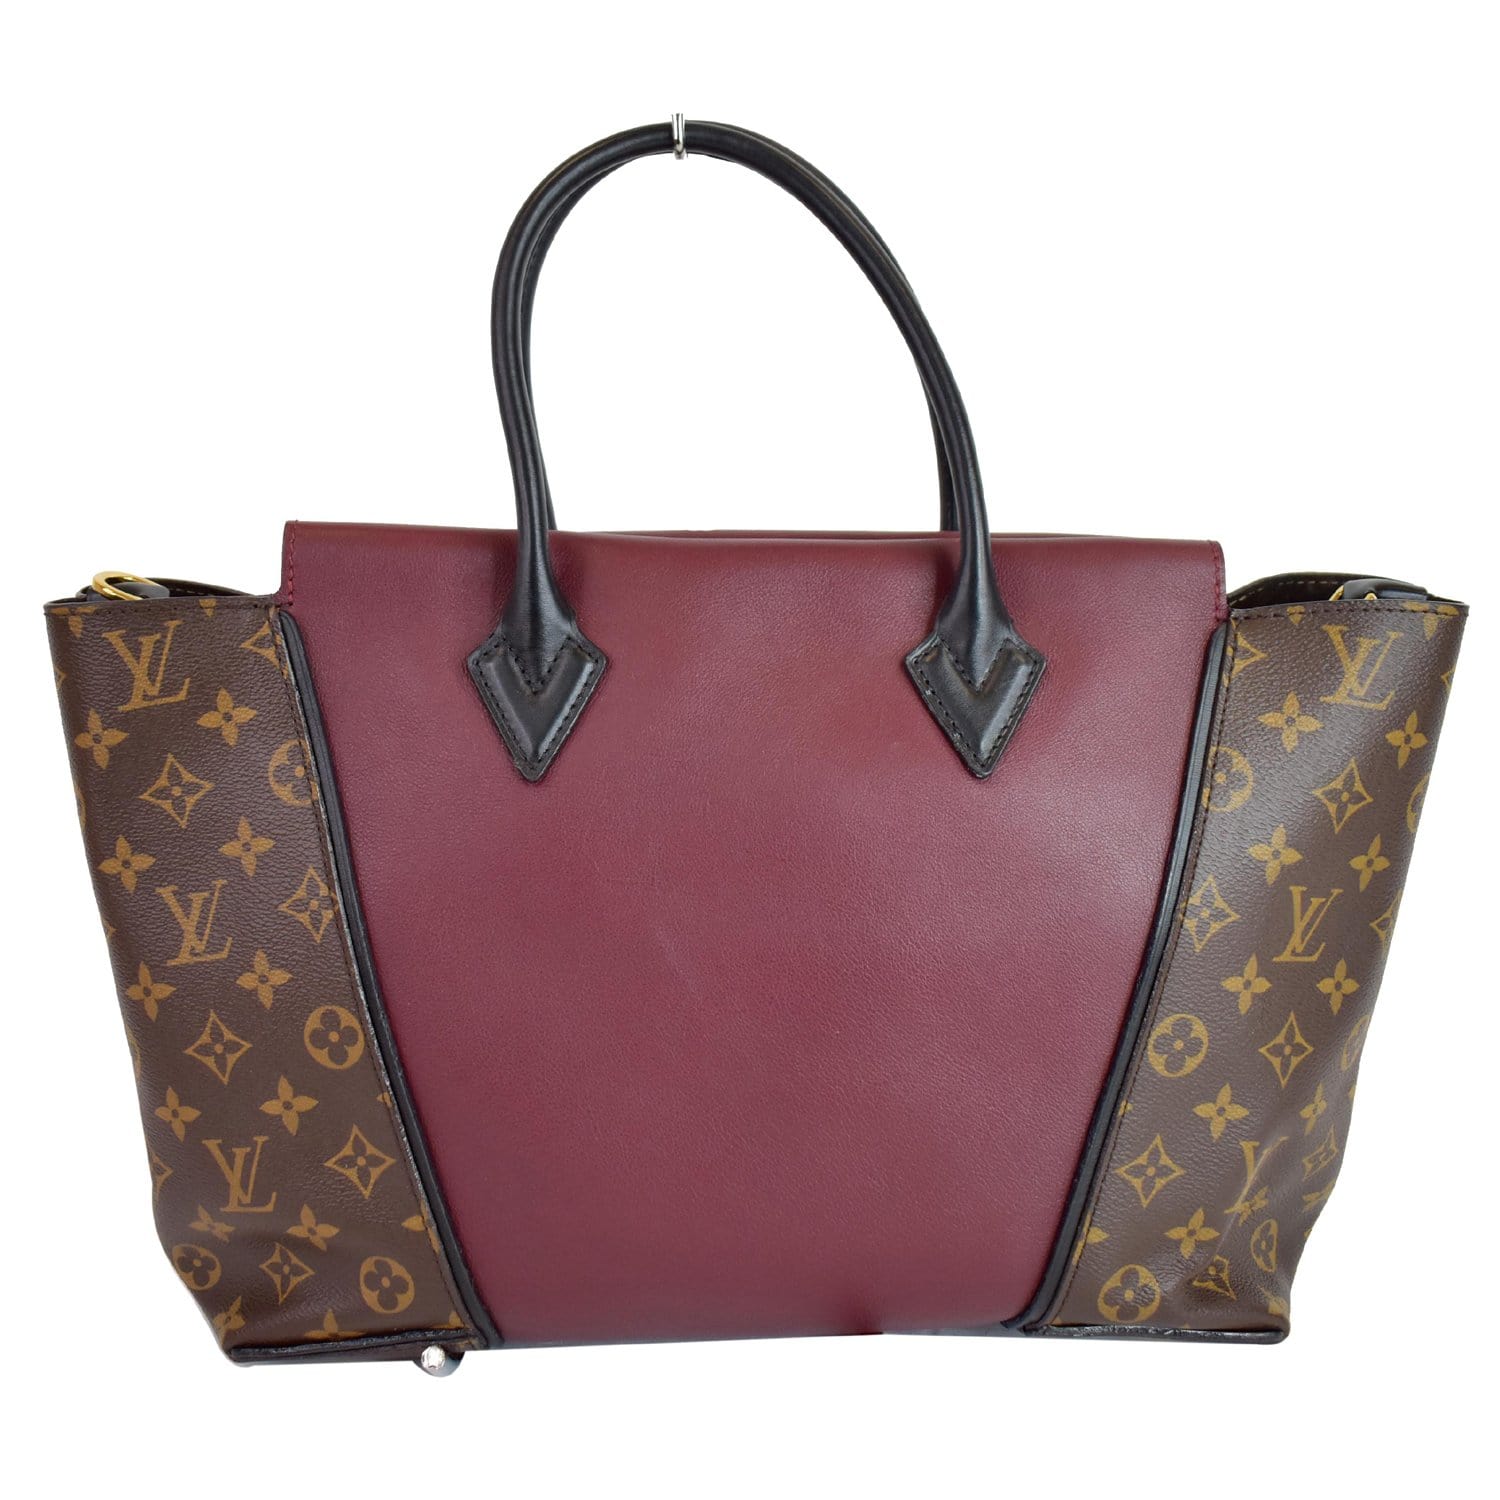 Louis Vuitton, Bags, Sold On Tradesy Louis Vuitton Neverfull Mm E